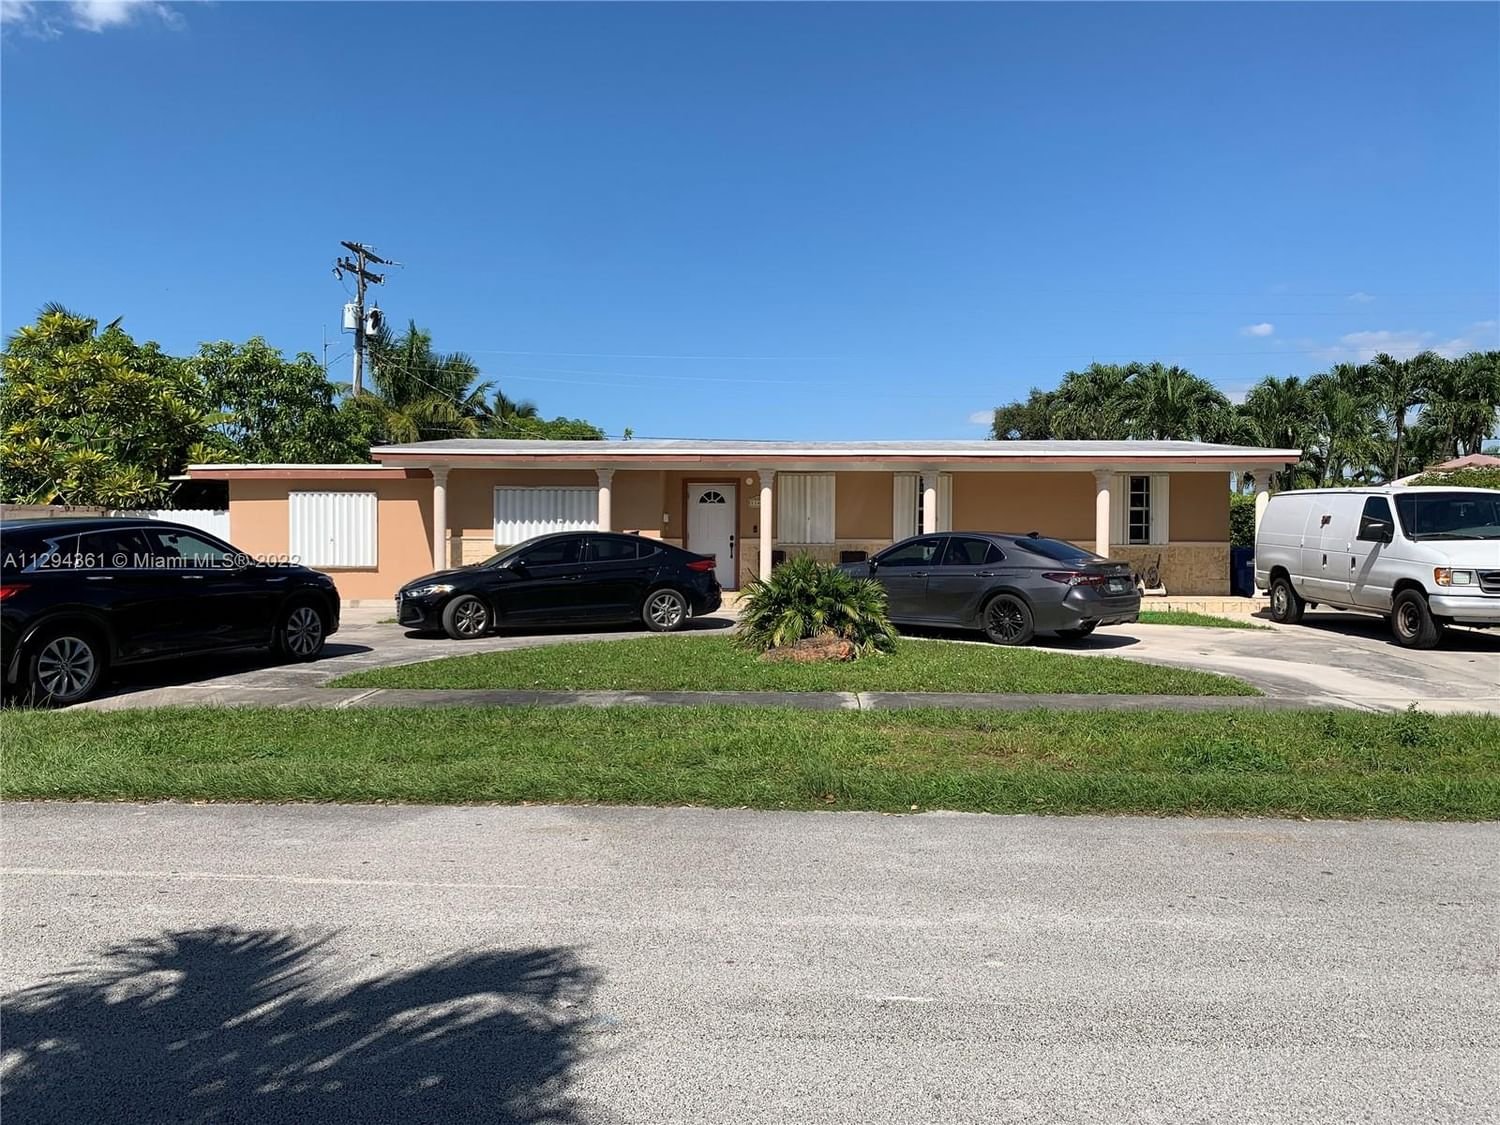 Real estate property located at 11465 42nd St, Miami-Dade County, Miami, FL